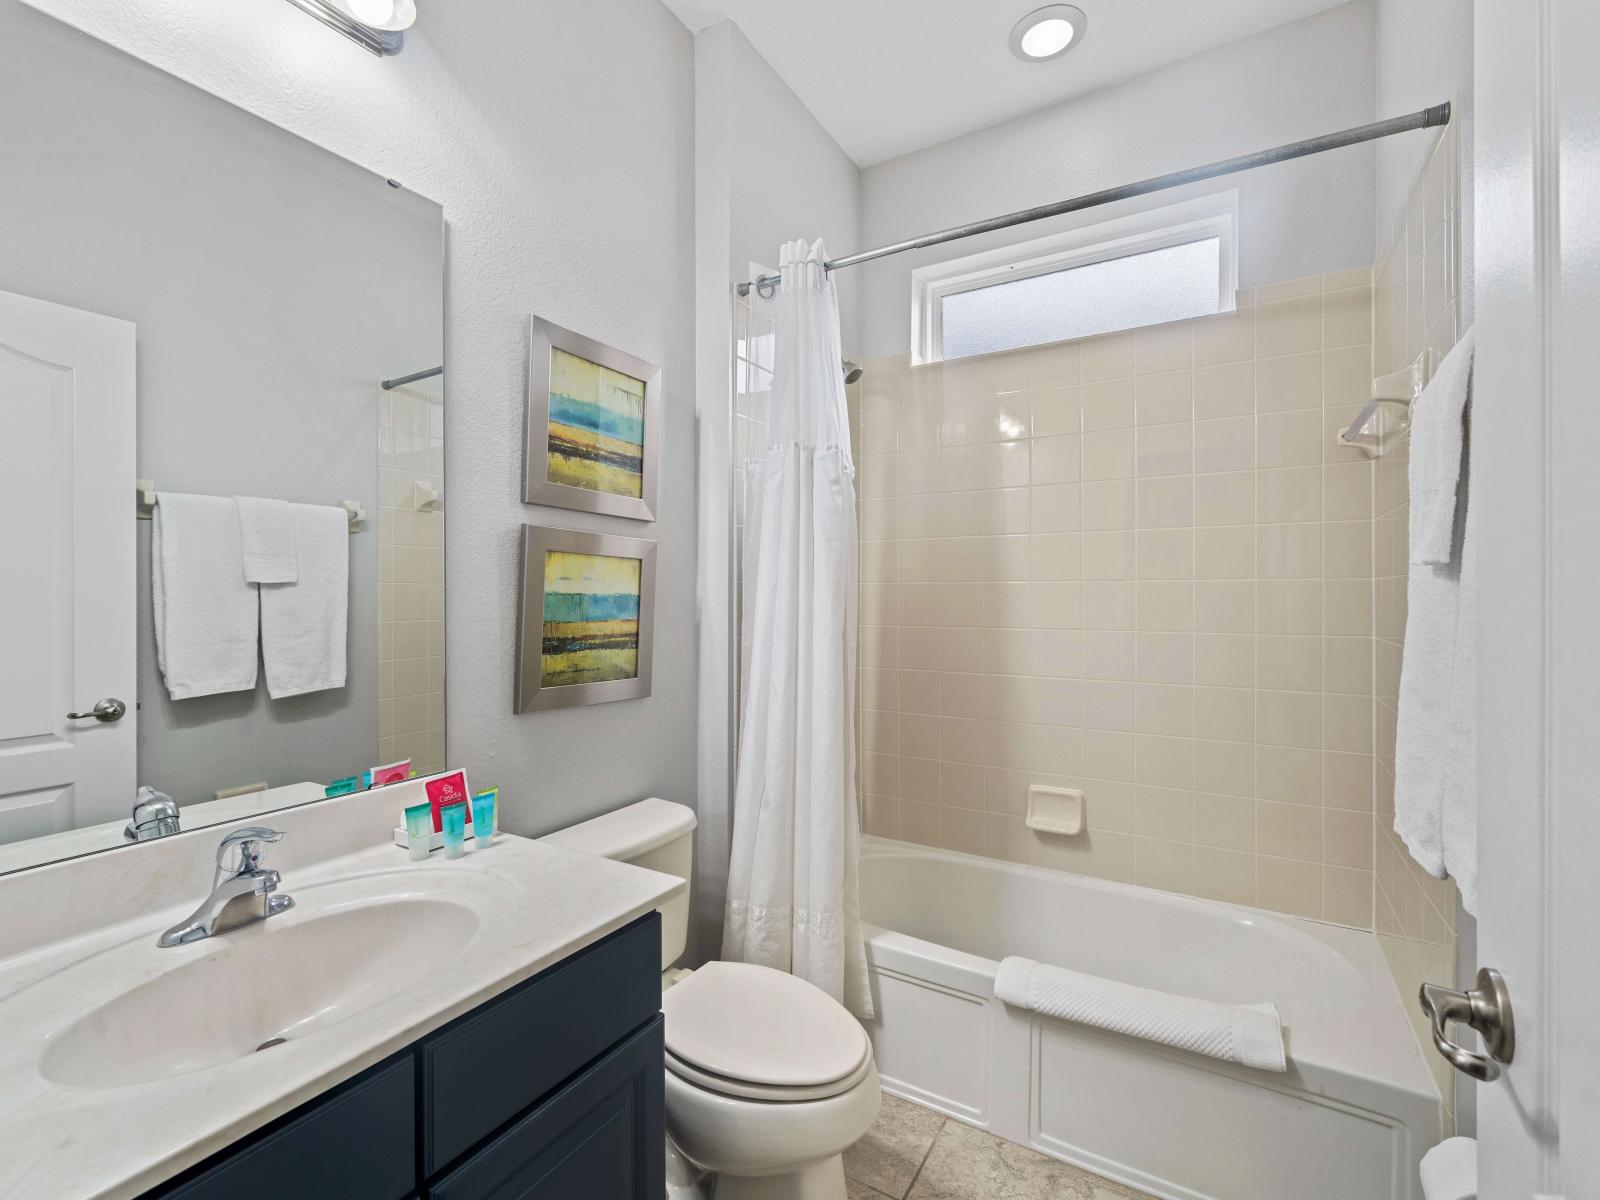 Bathroom 3 with a bathtub and shower combo